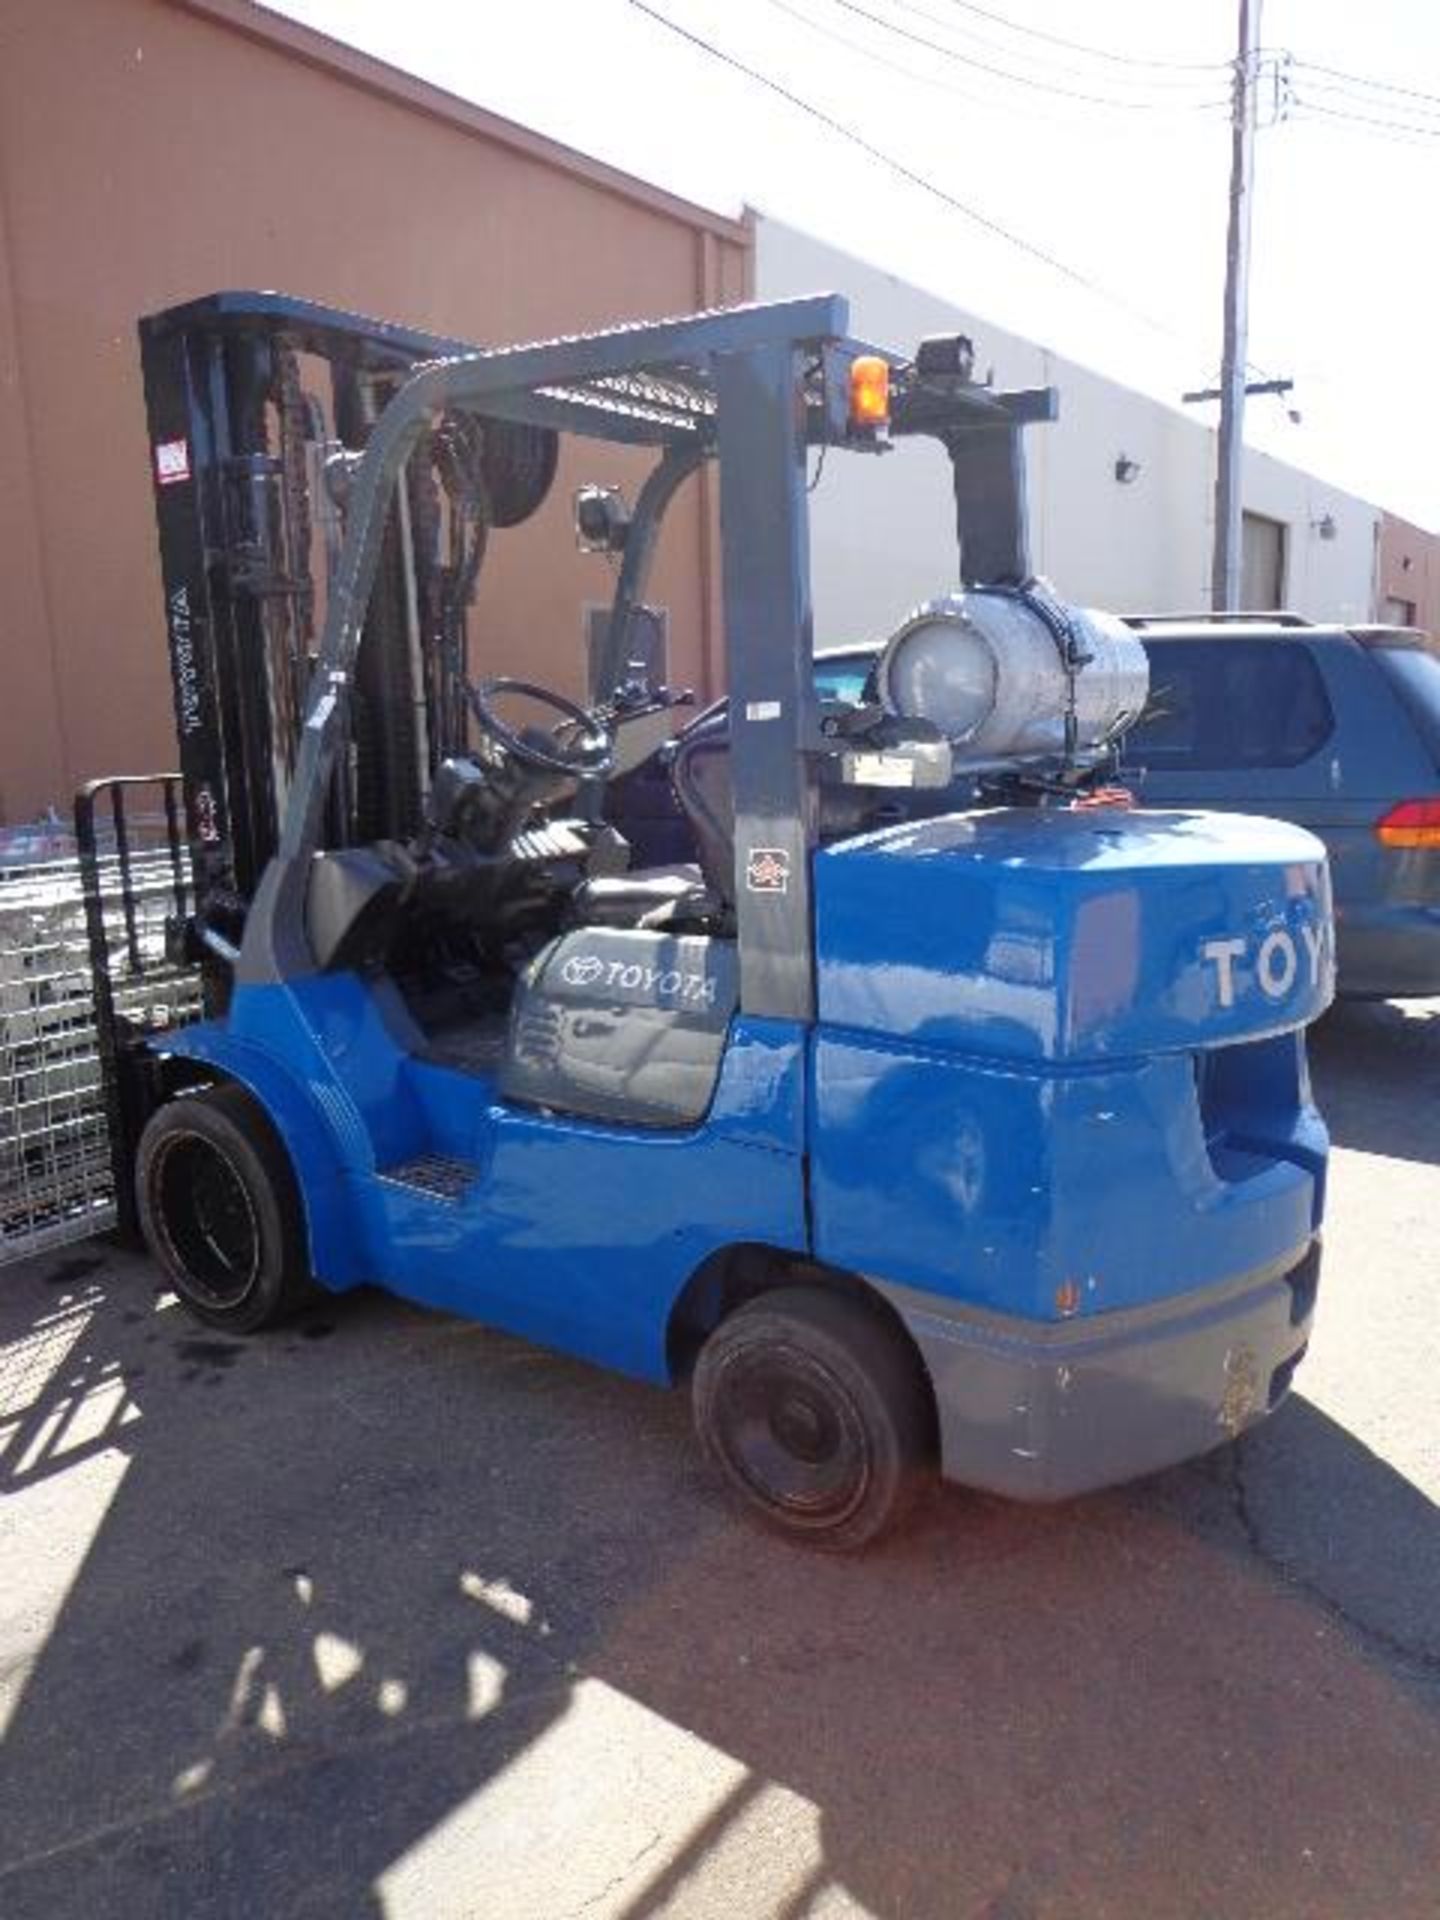 Toyota 7FGCU45 9000 Lb Cap LPG Forklift s/n 70247 w/ 3-Stage Mast, 187” Lift Height, SS, SOLD AS IS - Image 2 of 12